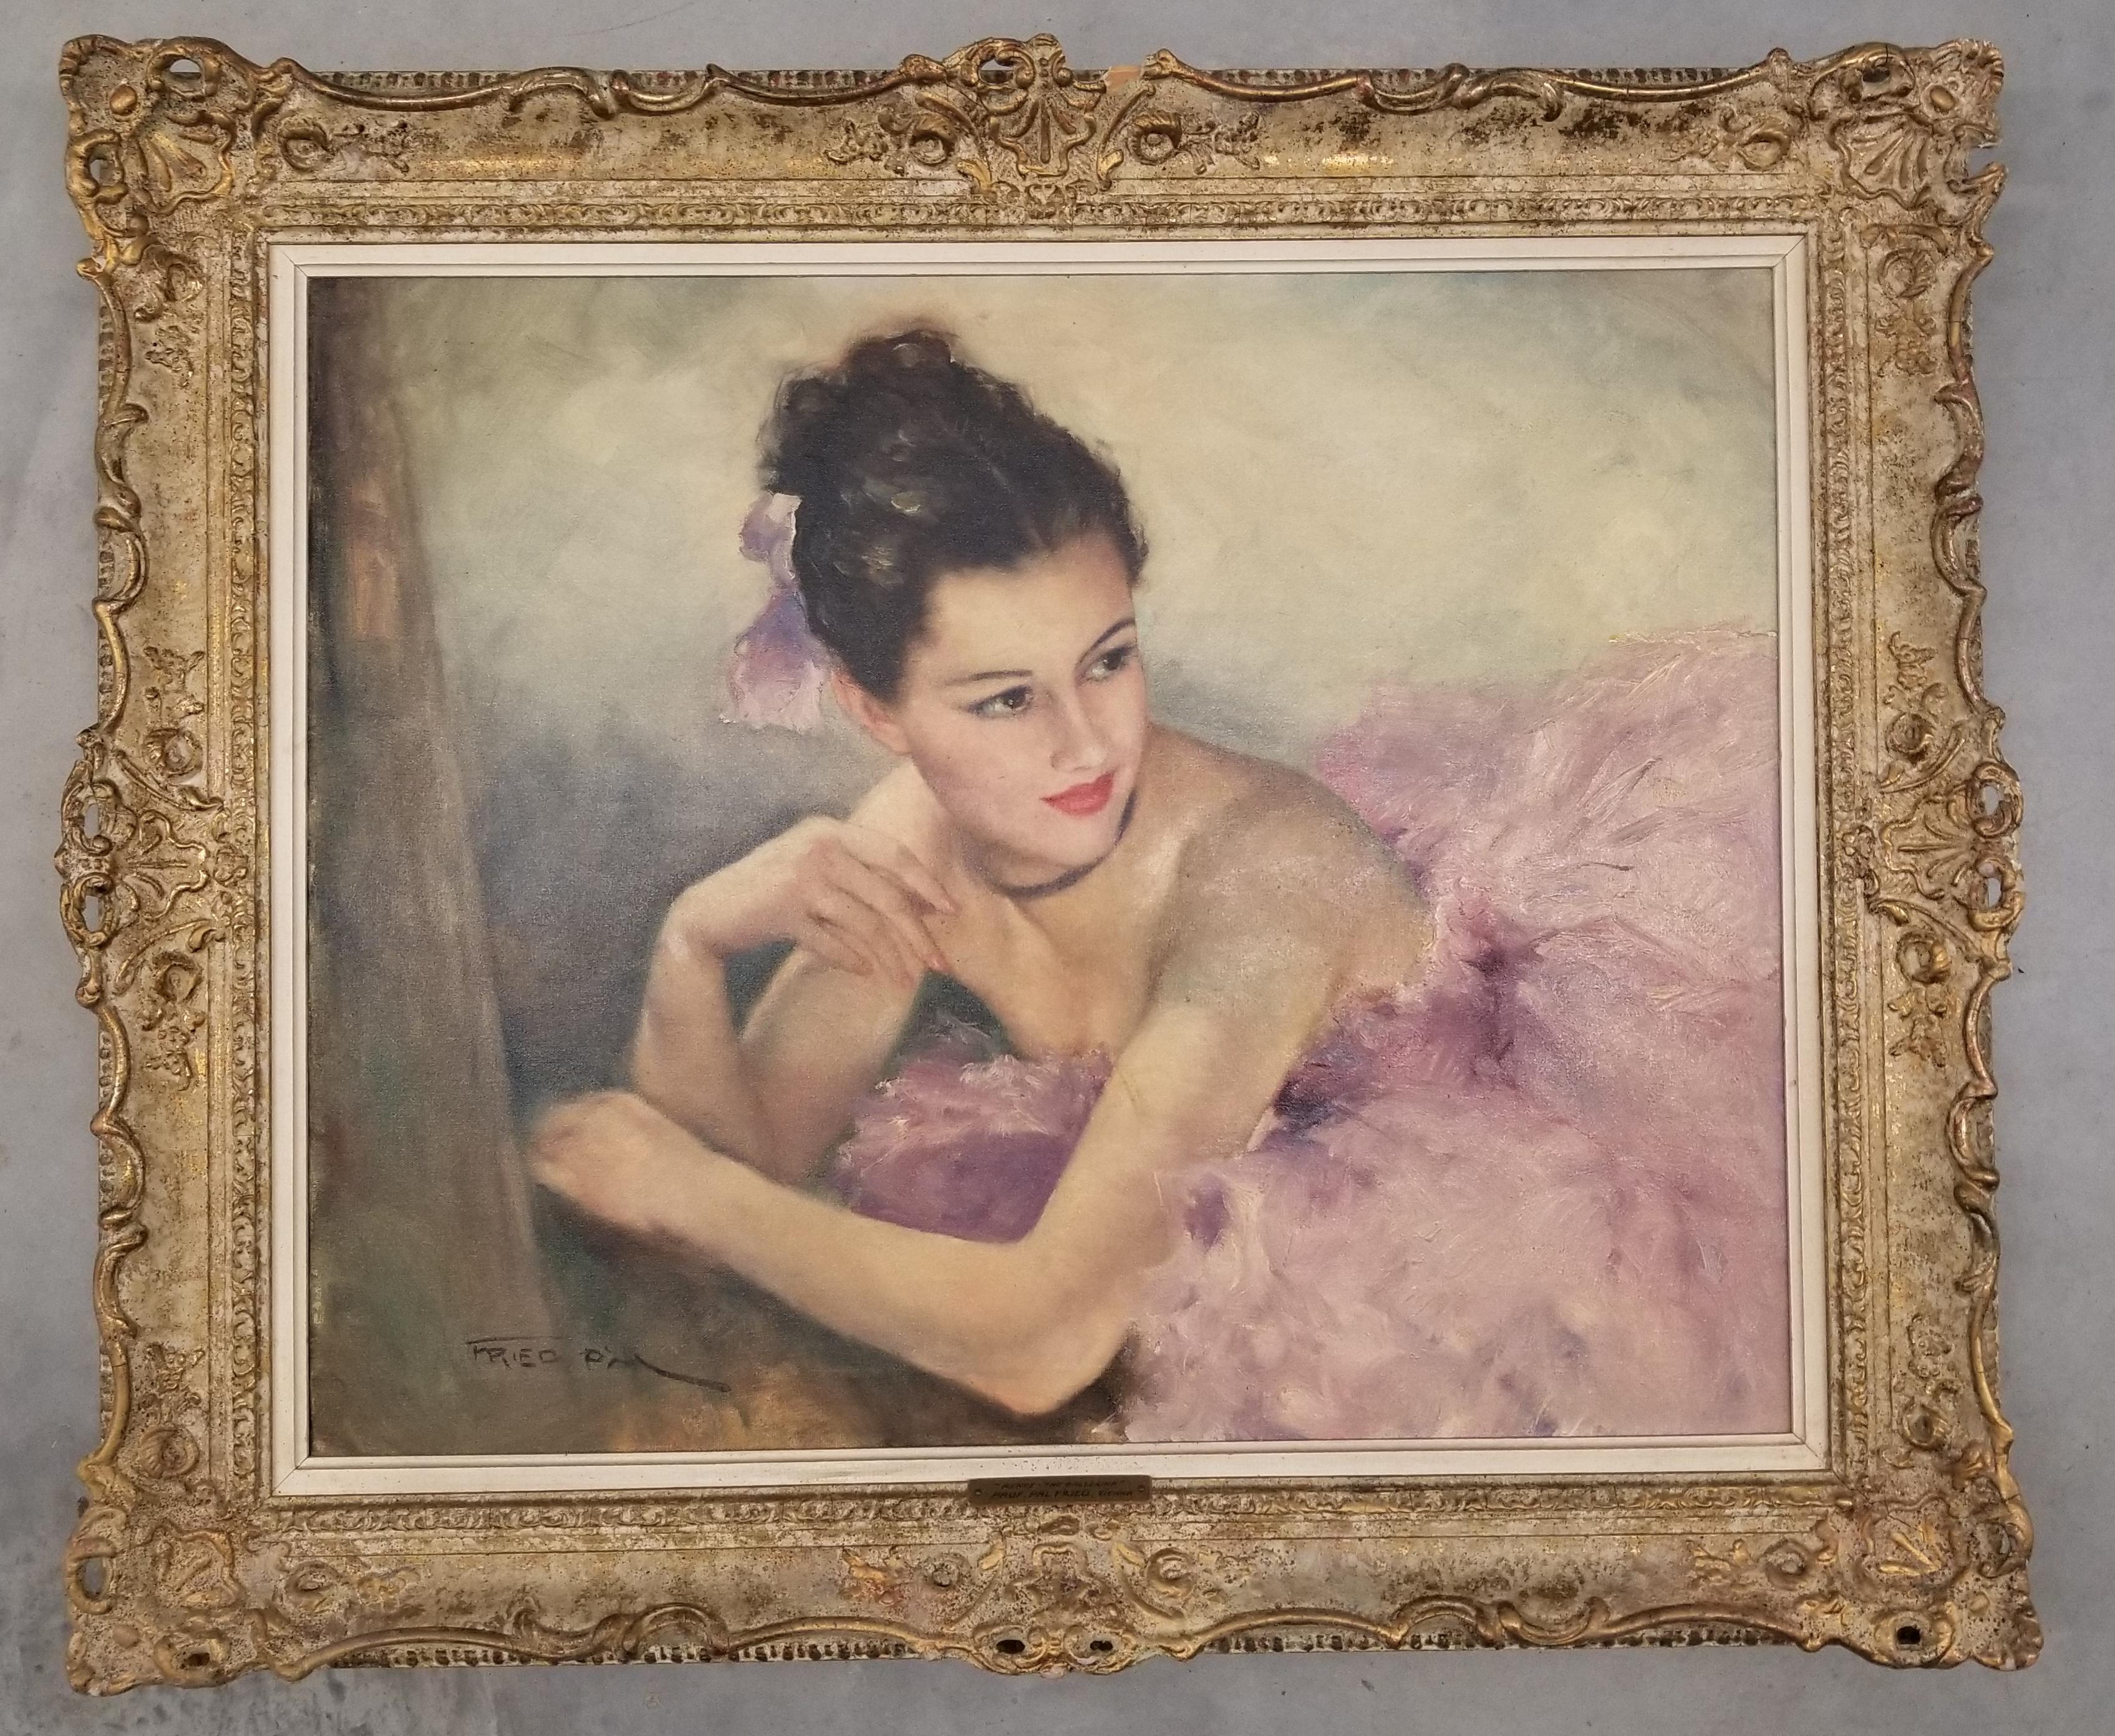 Renee - The Ballerina  - Painting by Pal Fried